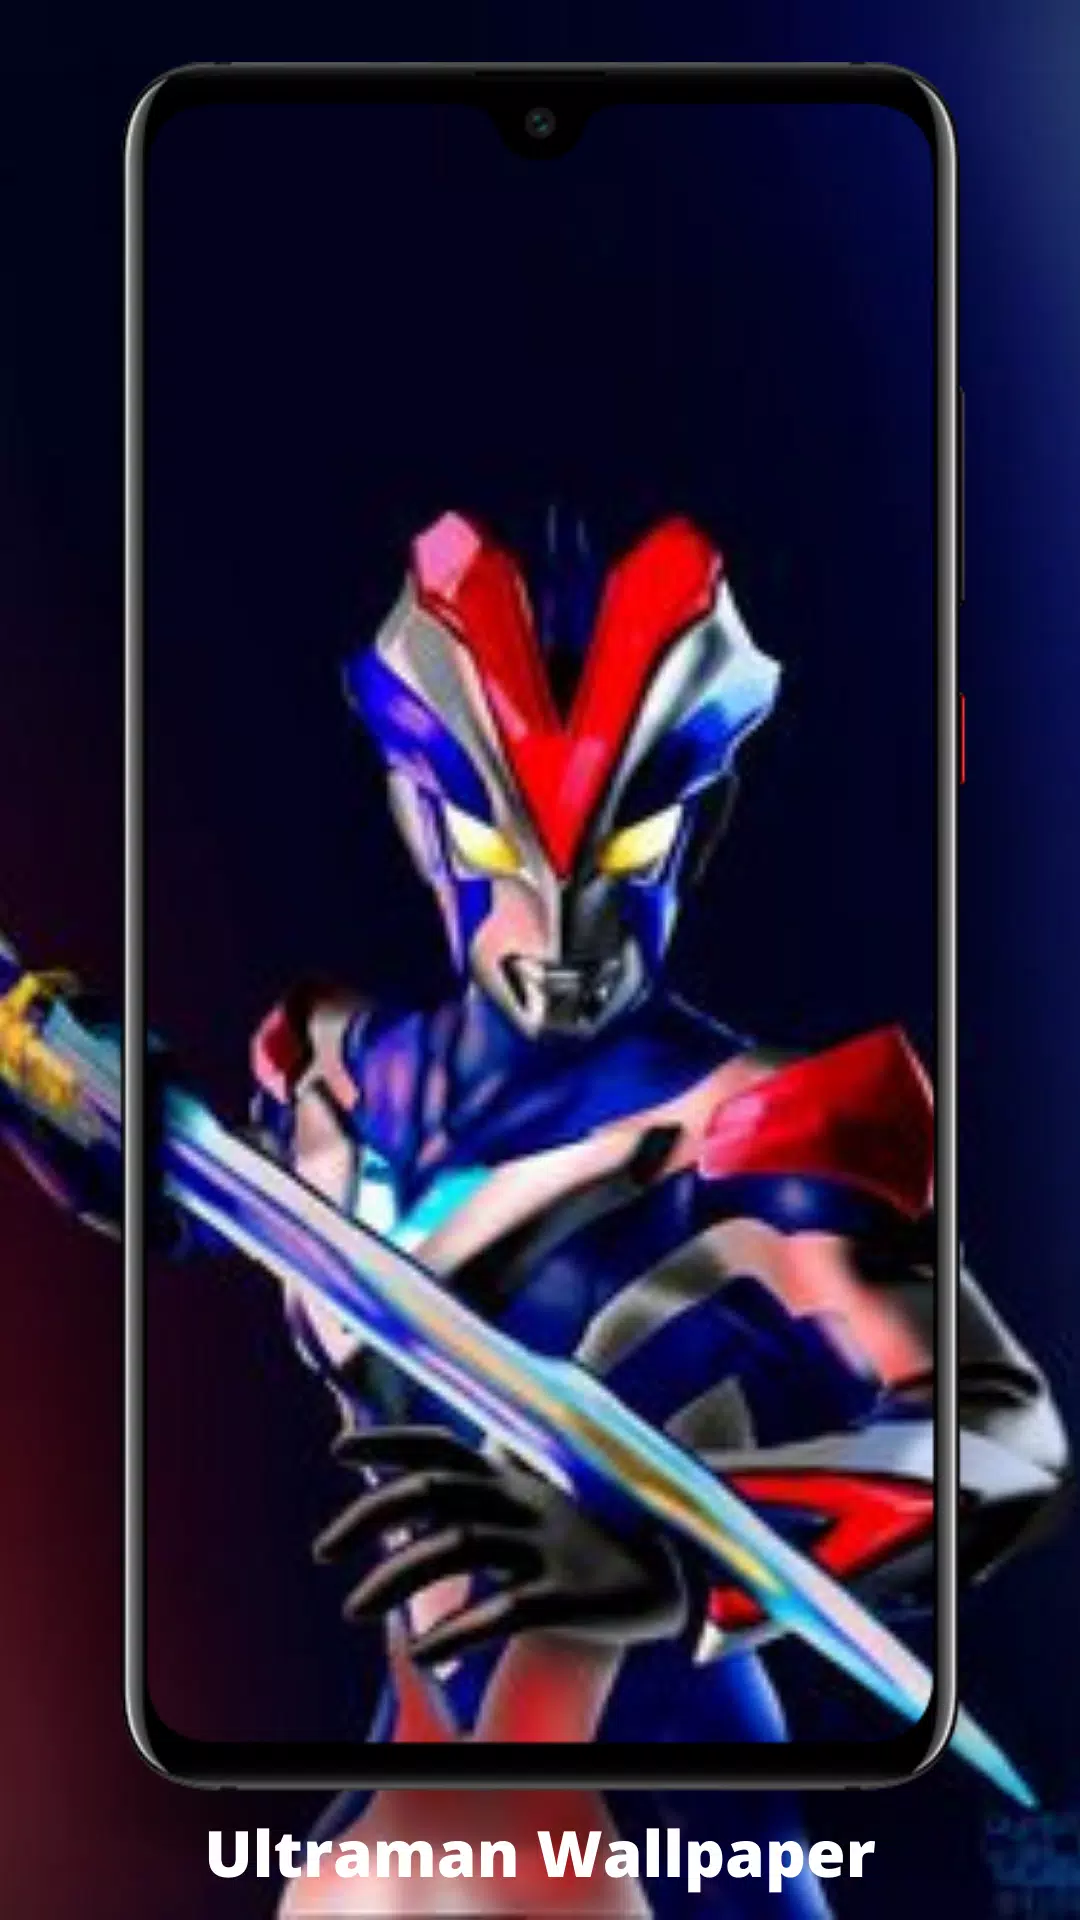 New Ultraman Legend Wallpaper Hd Apk For Android Download